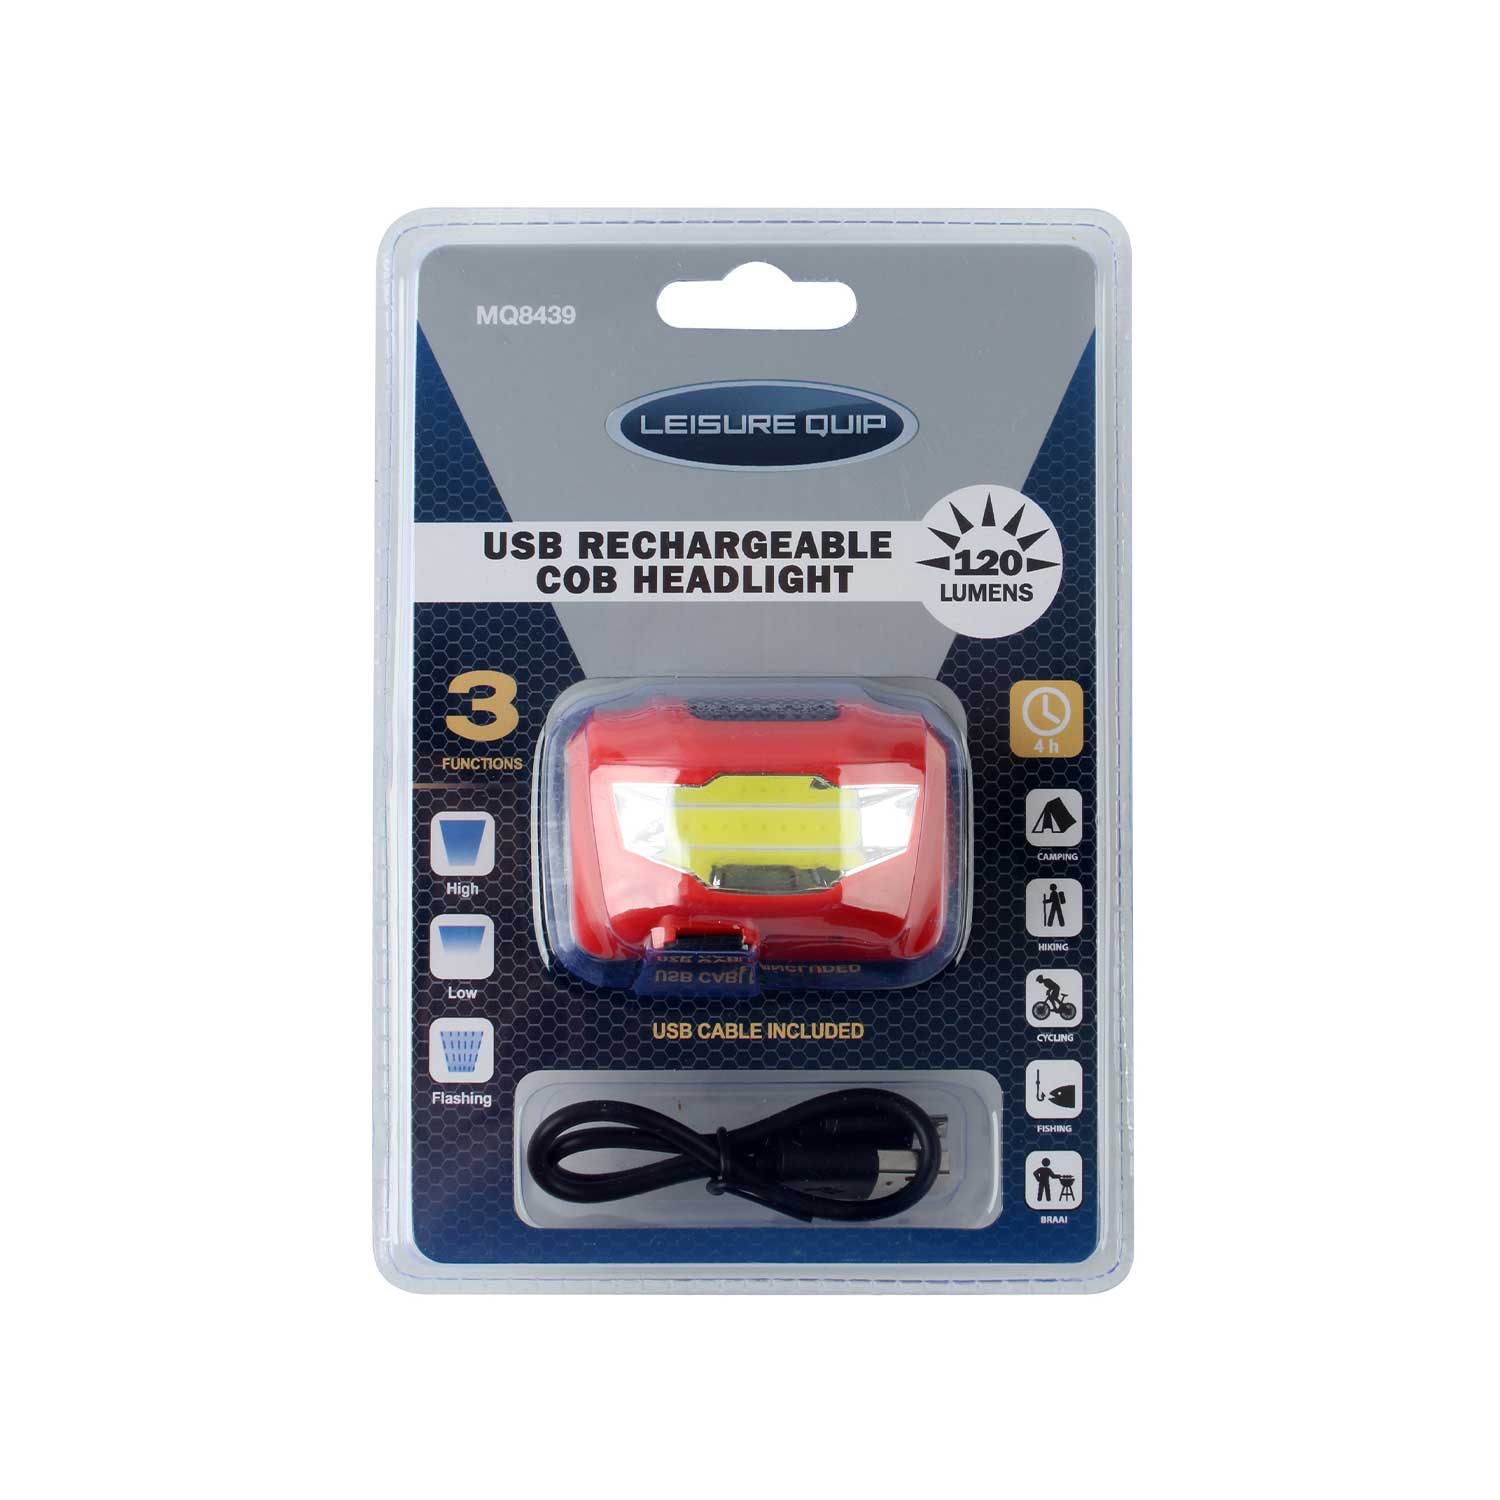 Usb Rechargeable Cob Headlight 110 Lumes – Colour Orange And Black – Usb Cable Included